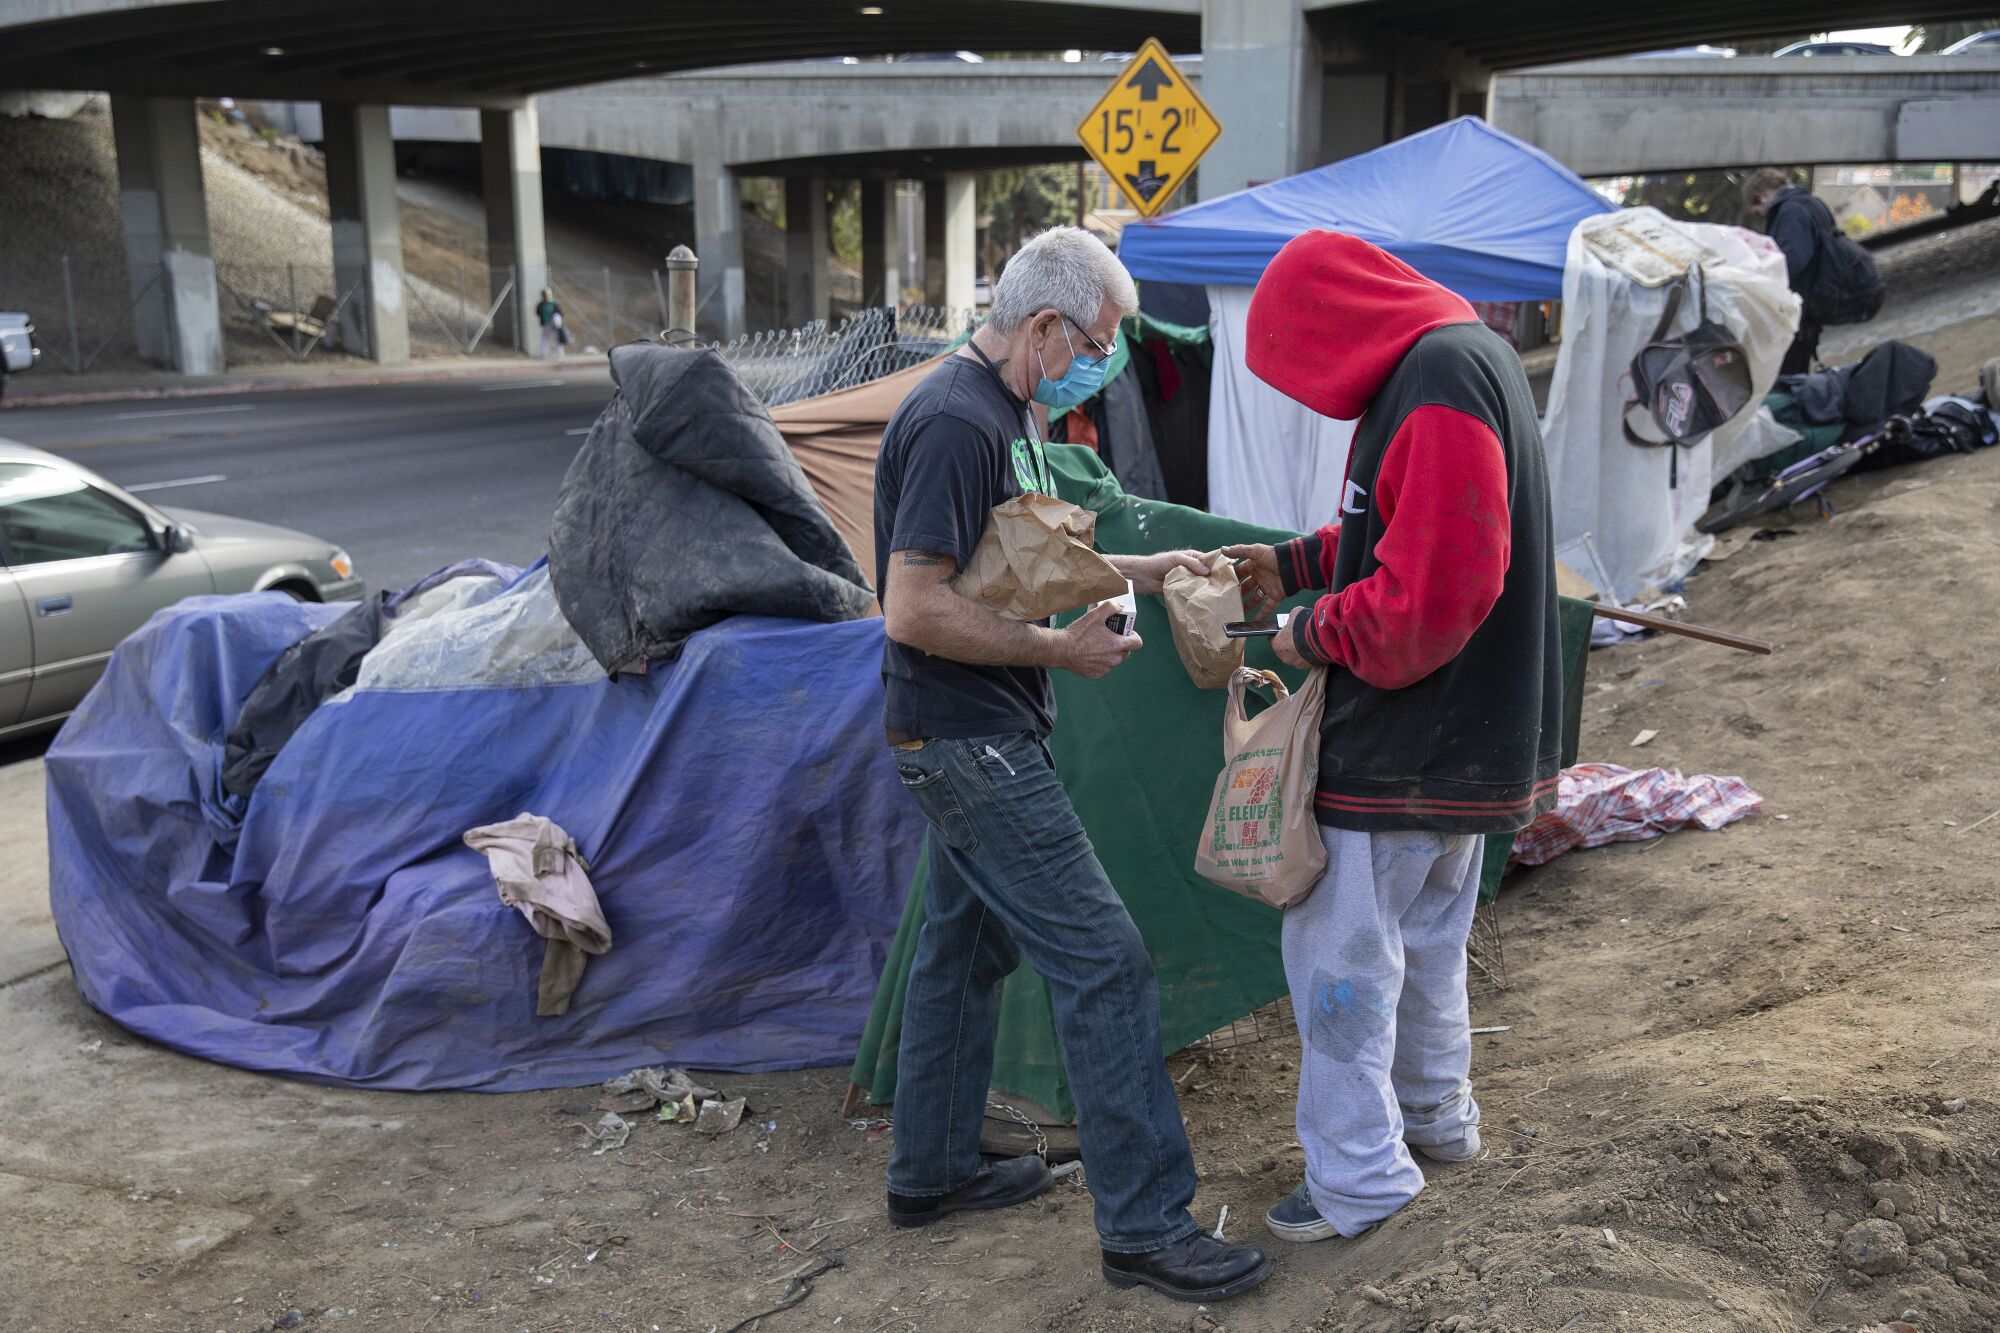 Jason Sodenkamp hands a care package to a client at a homeless encampment. 